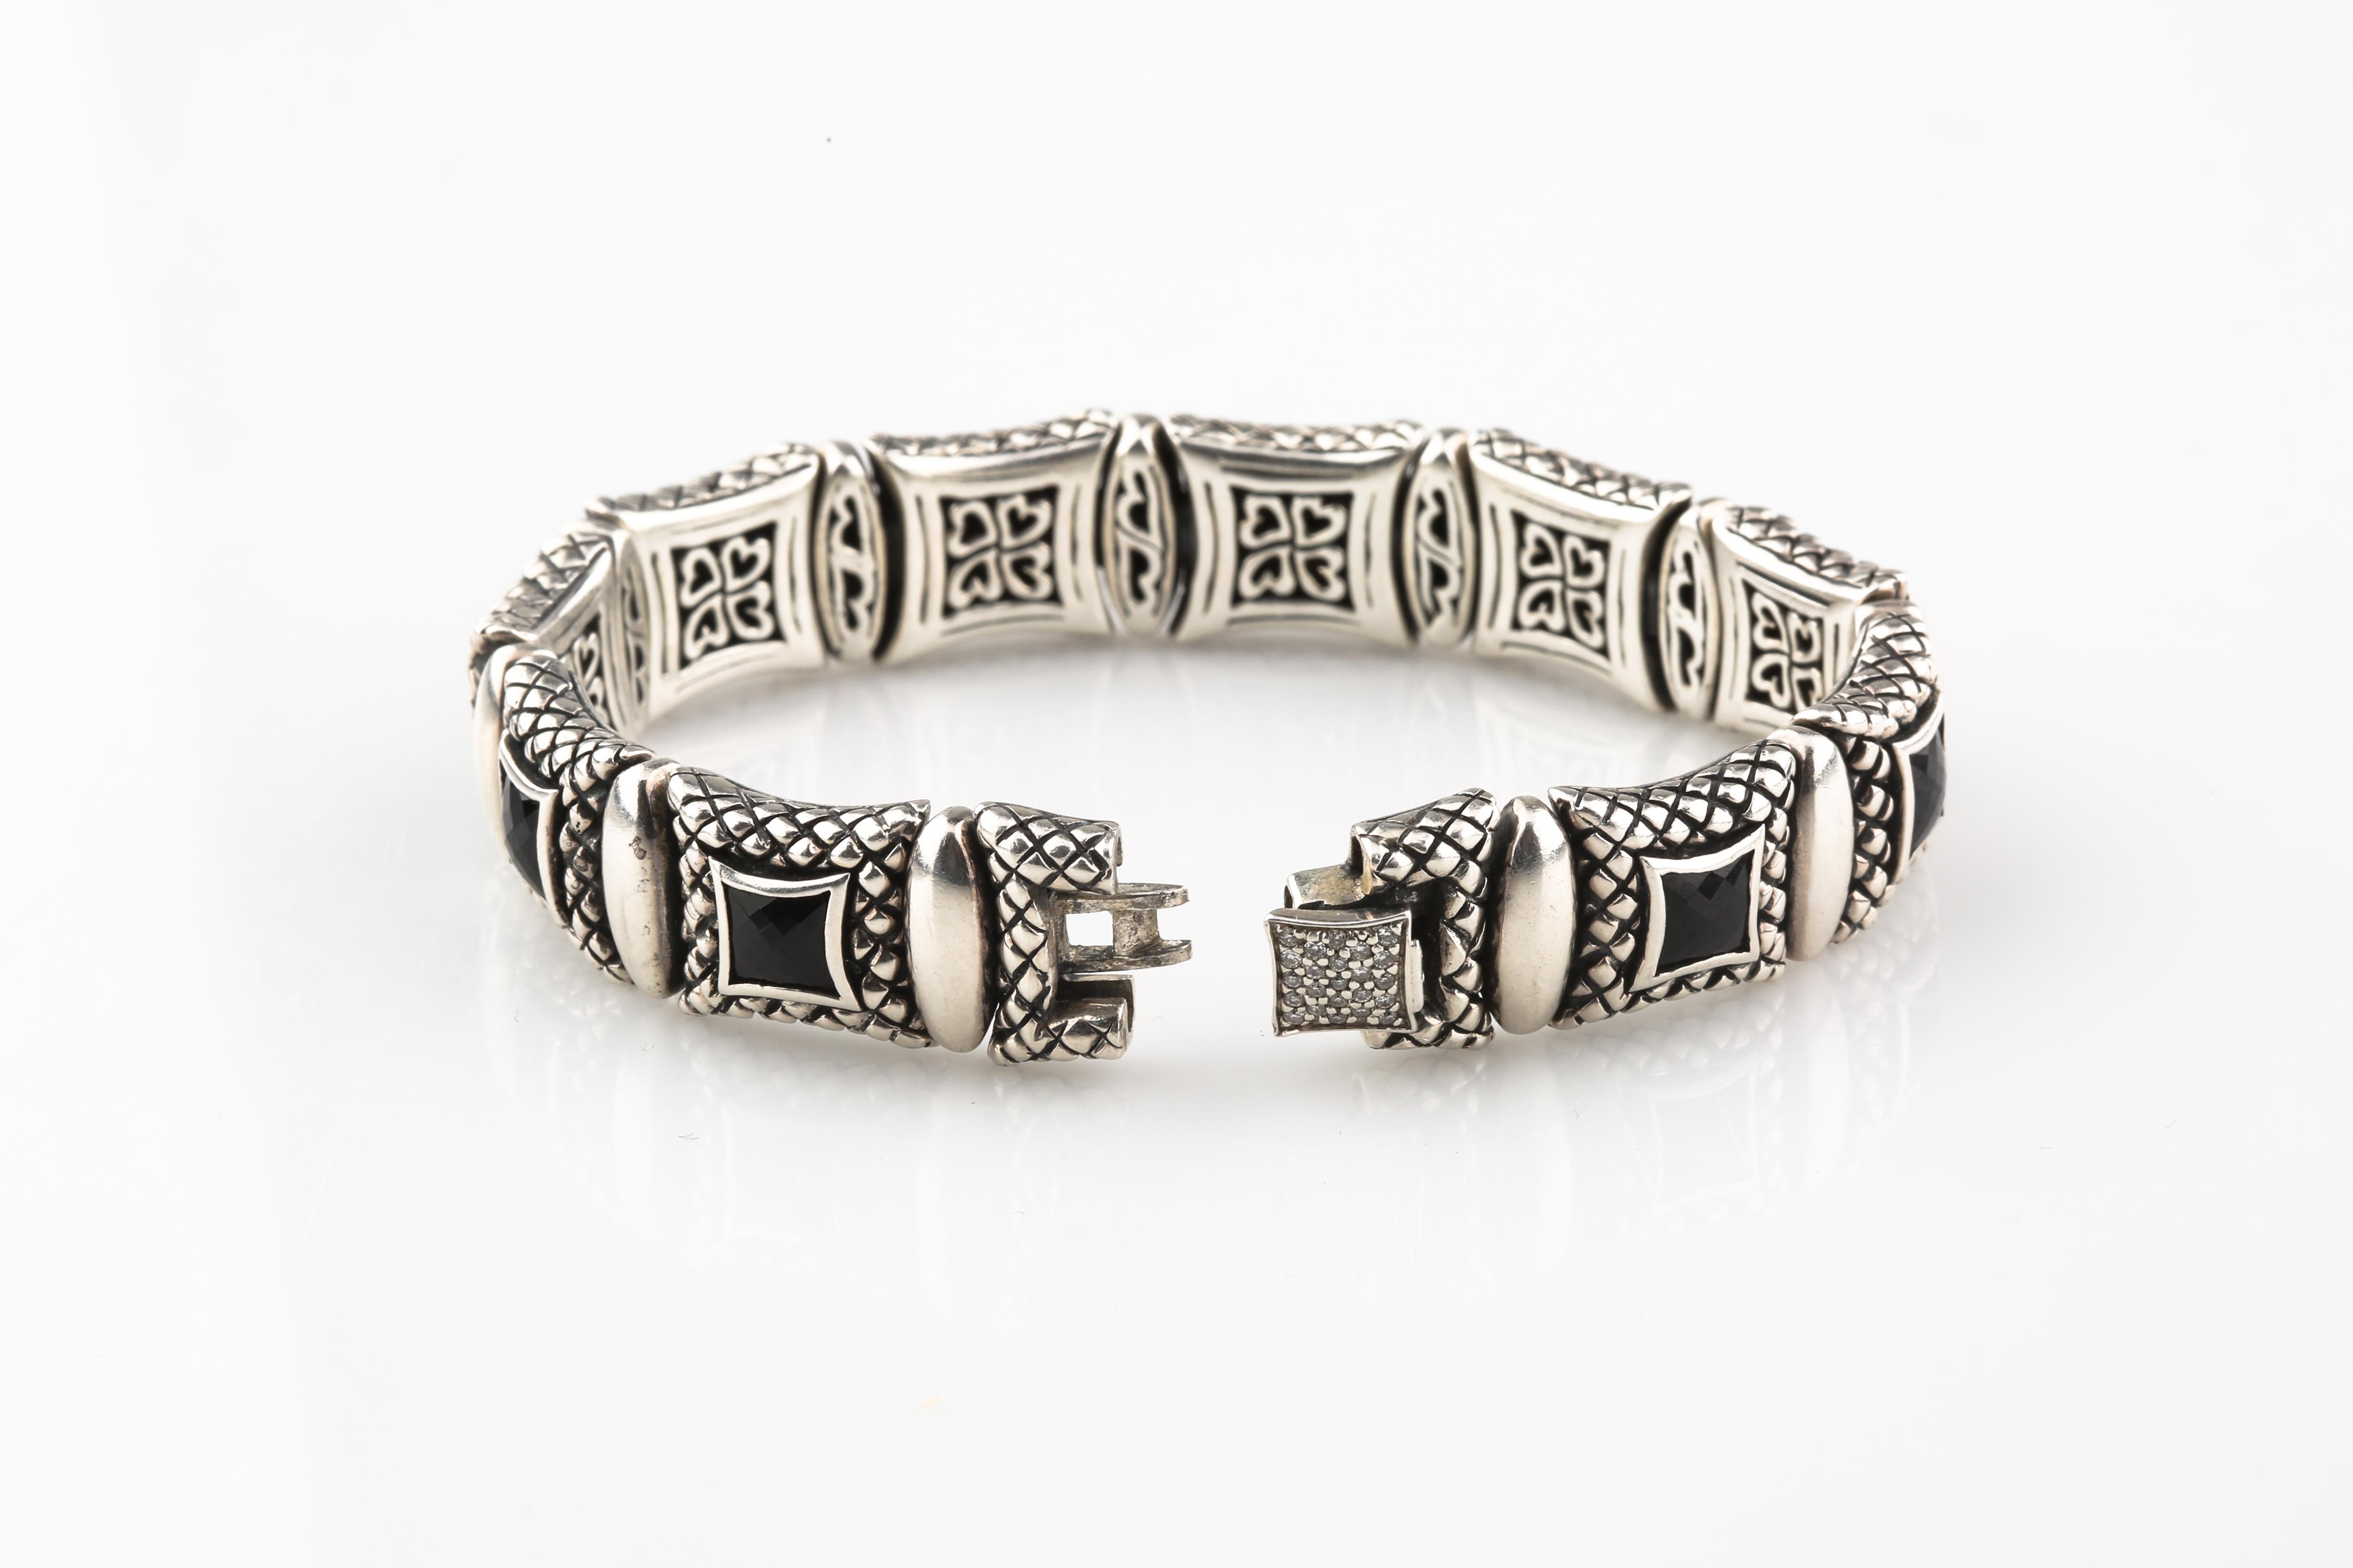 Sterling Silver Equestrian Link Bracelet
Each Etched Plaque Features a Faceted Onyx on the Front and Delicate Filigree on the Back
Clasp has Diamond Accents instead of Onyx. NOTE: Clasp is a little loose
7